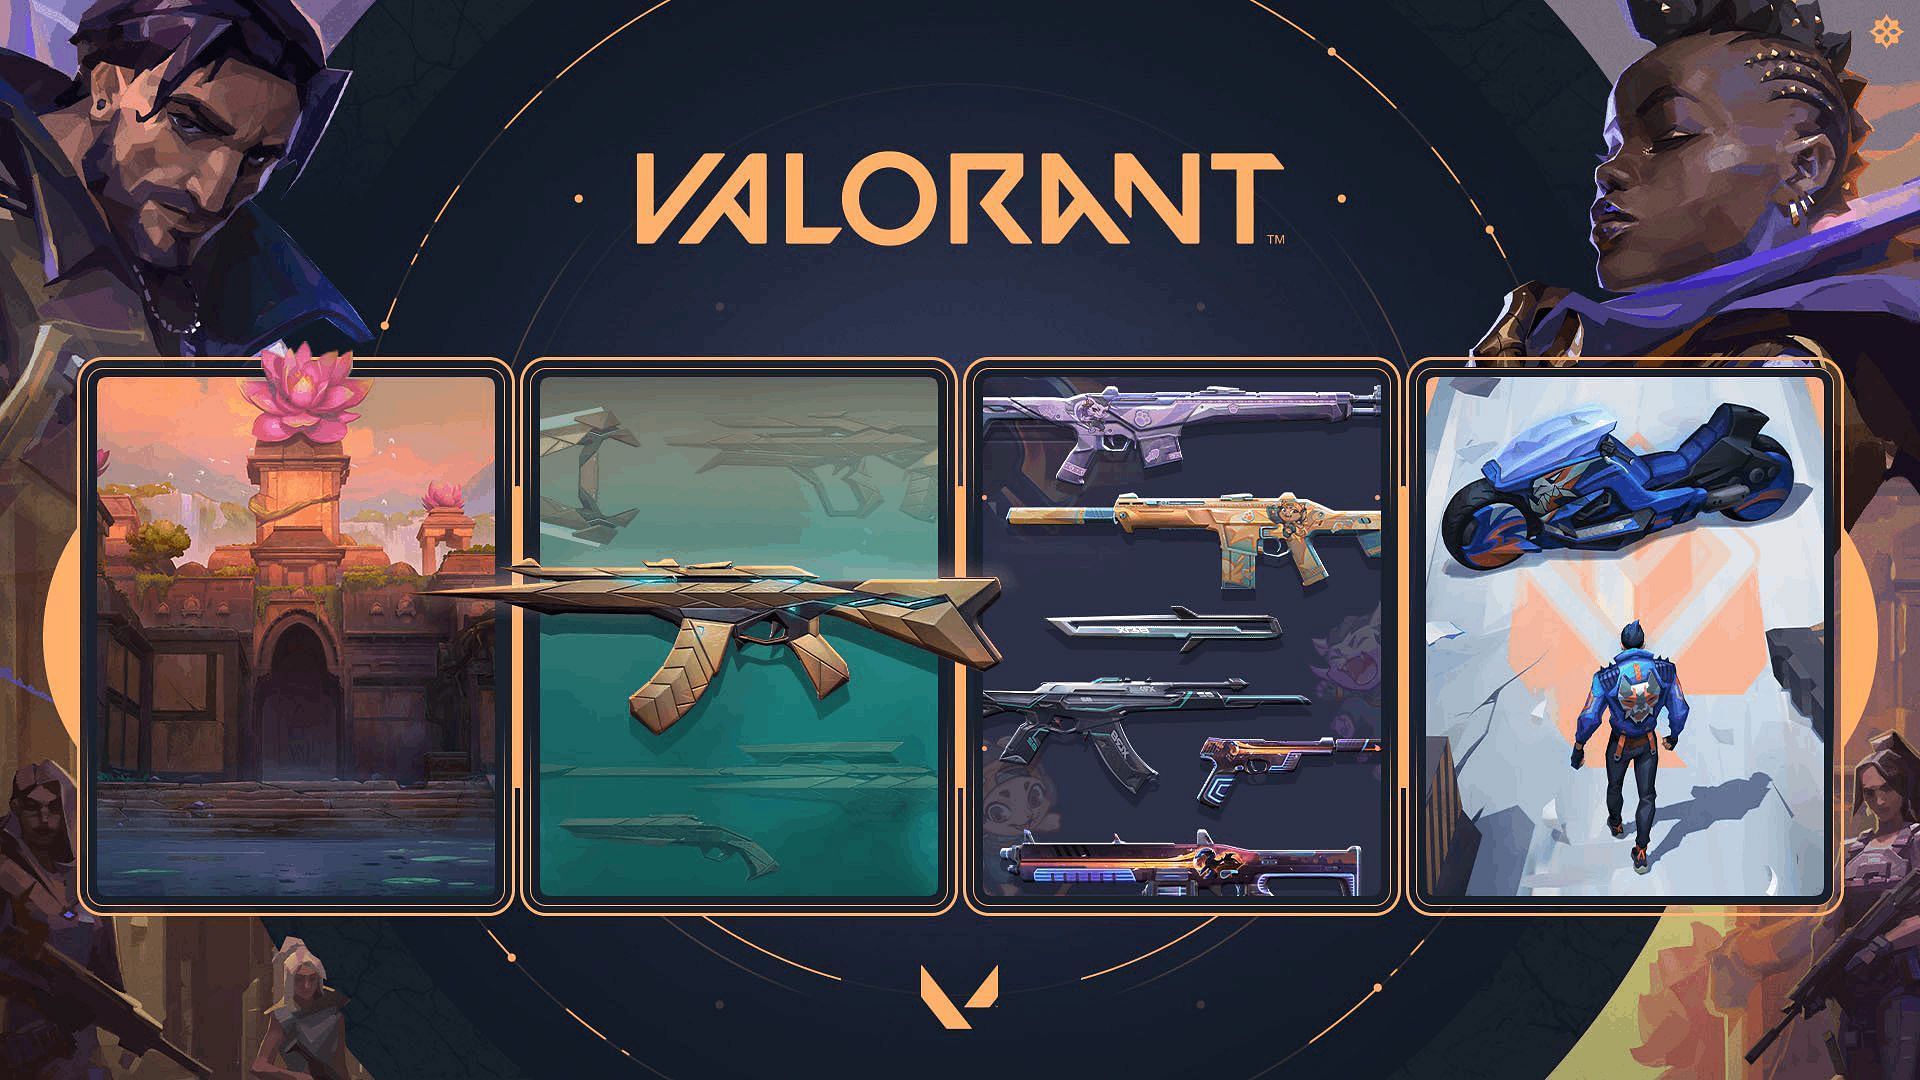 Valorant Episode 6 Act 1 weekly missions (Image via Riot Games)